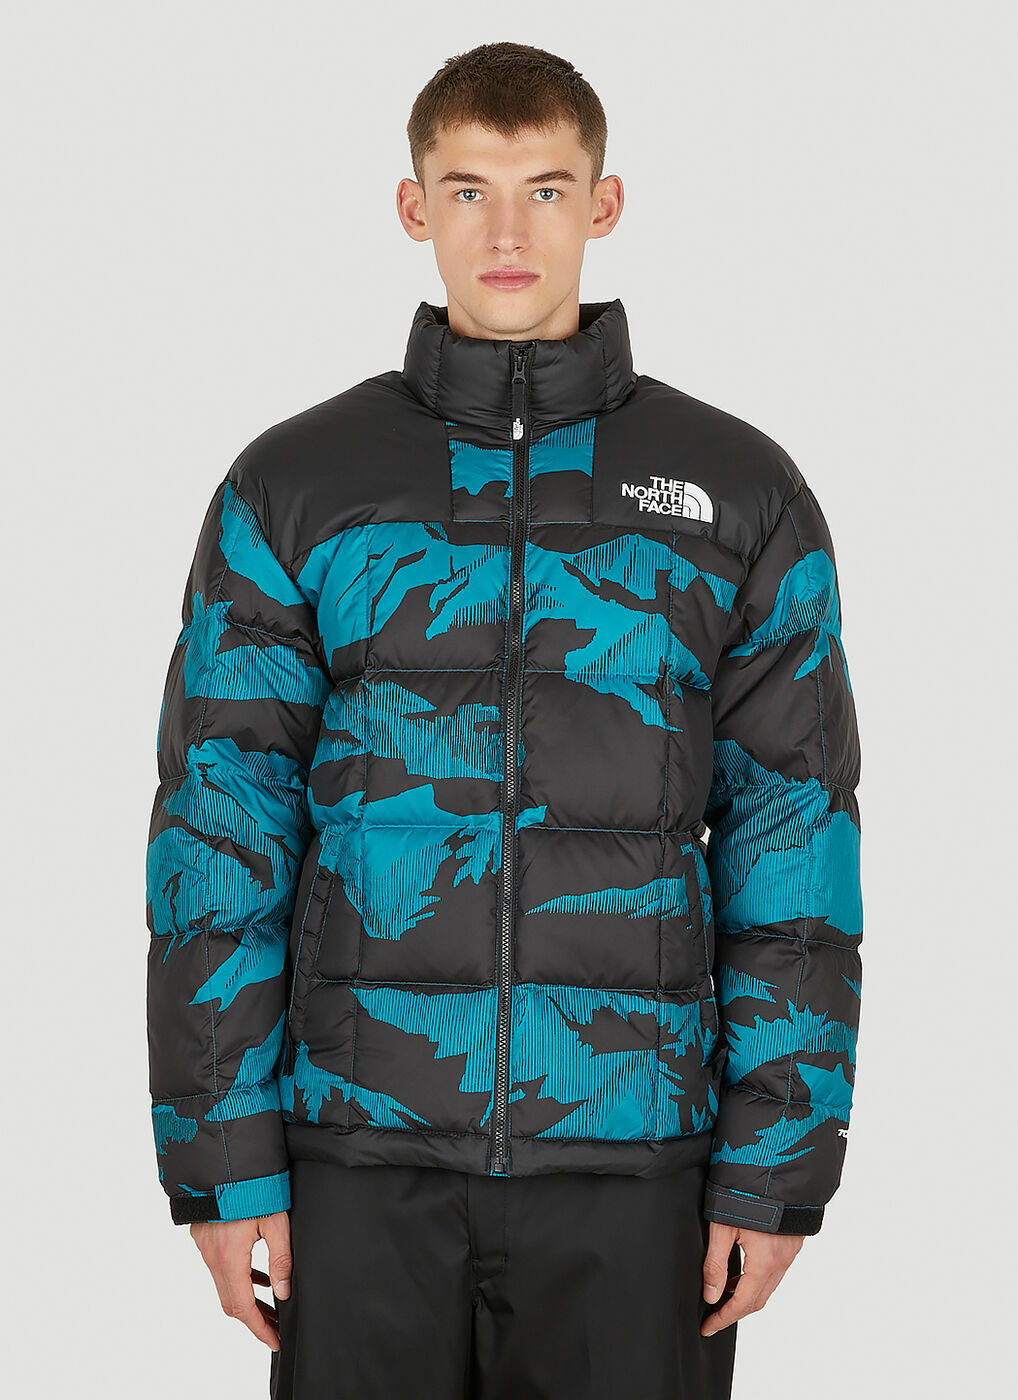 Lhotse Jacket in Black The North Face